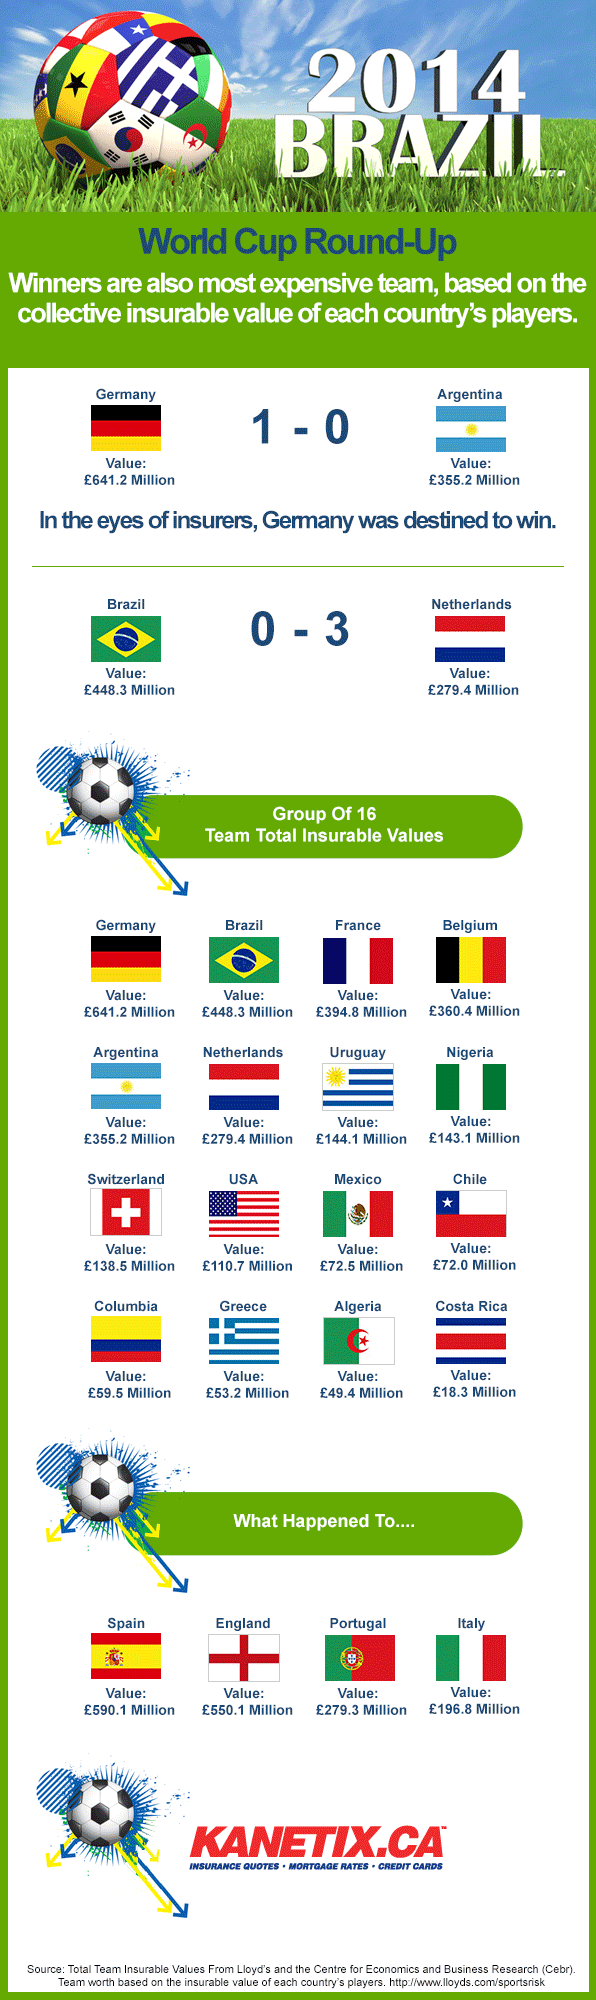 World Cup Round-Up: Winners Are Also Most Expensive Team